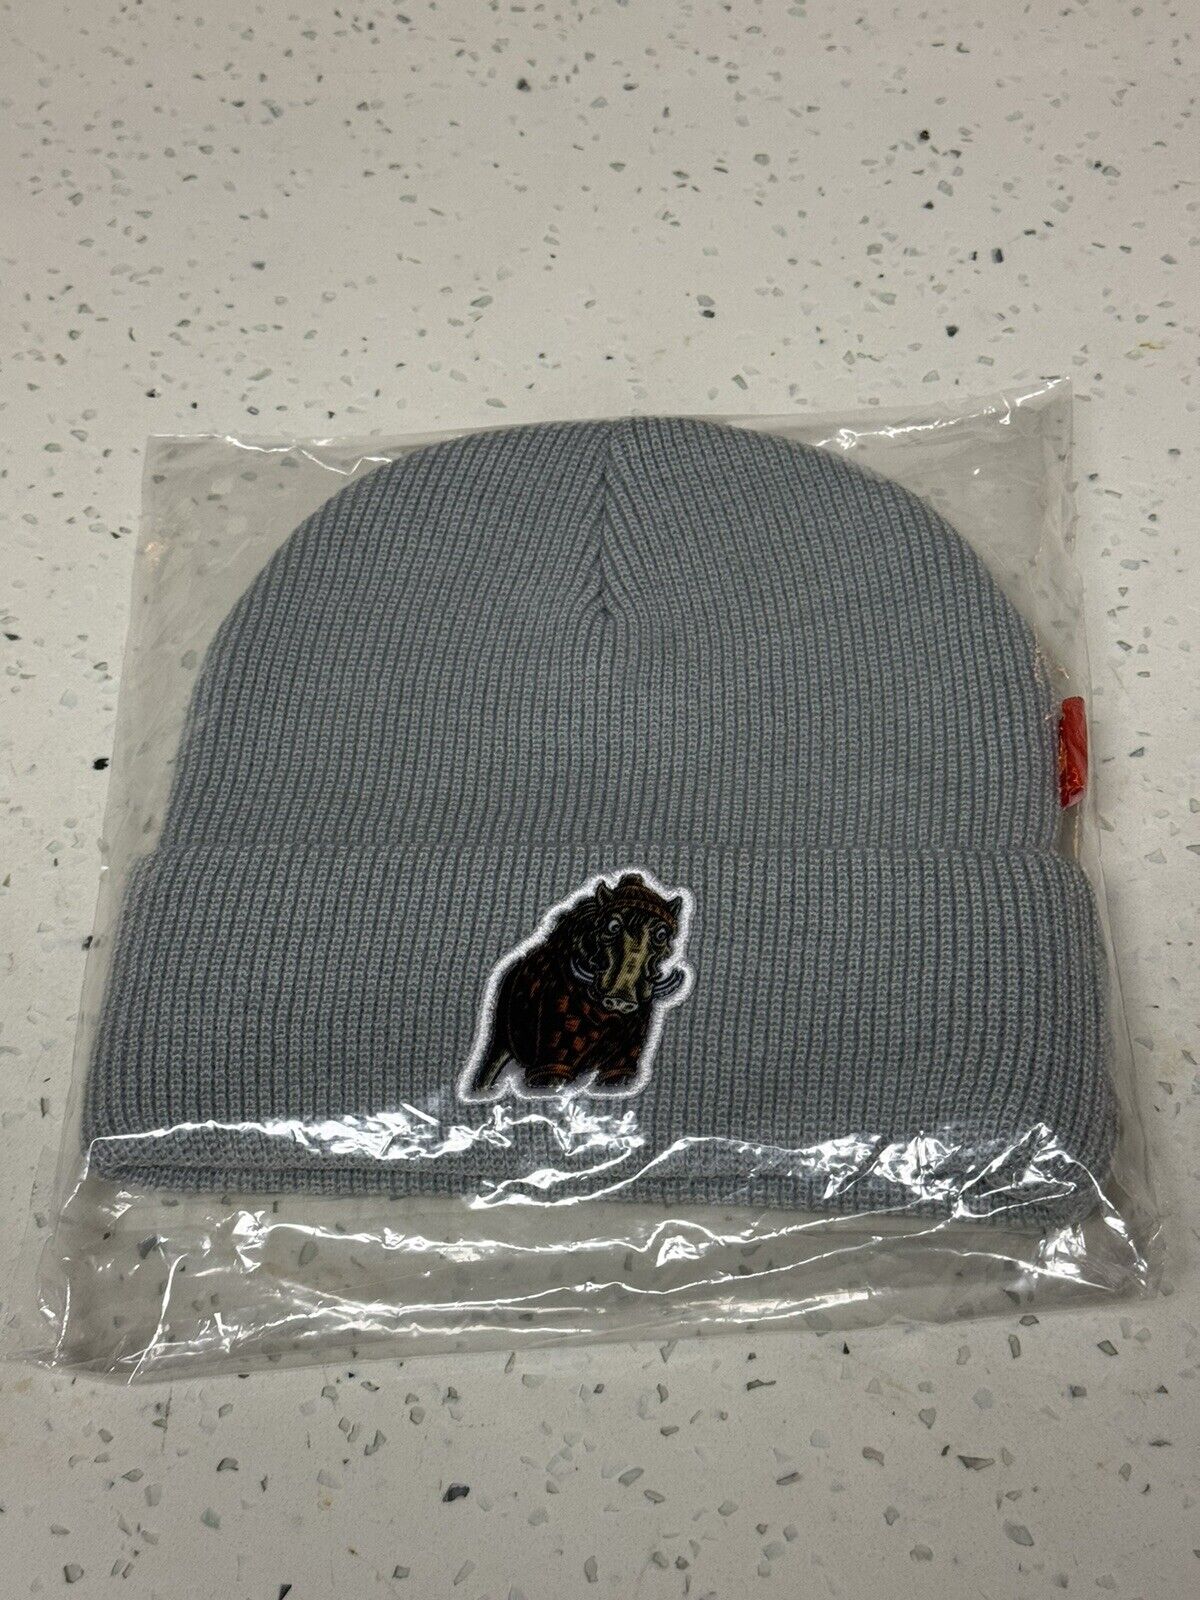 Great Notion brewing Brand New Beanie Hat